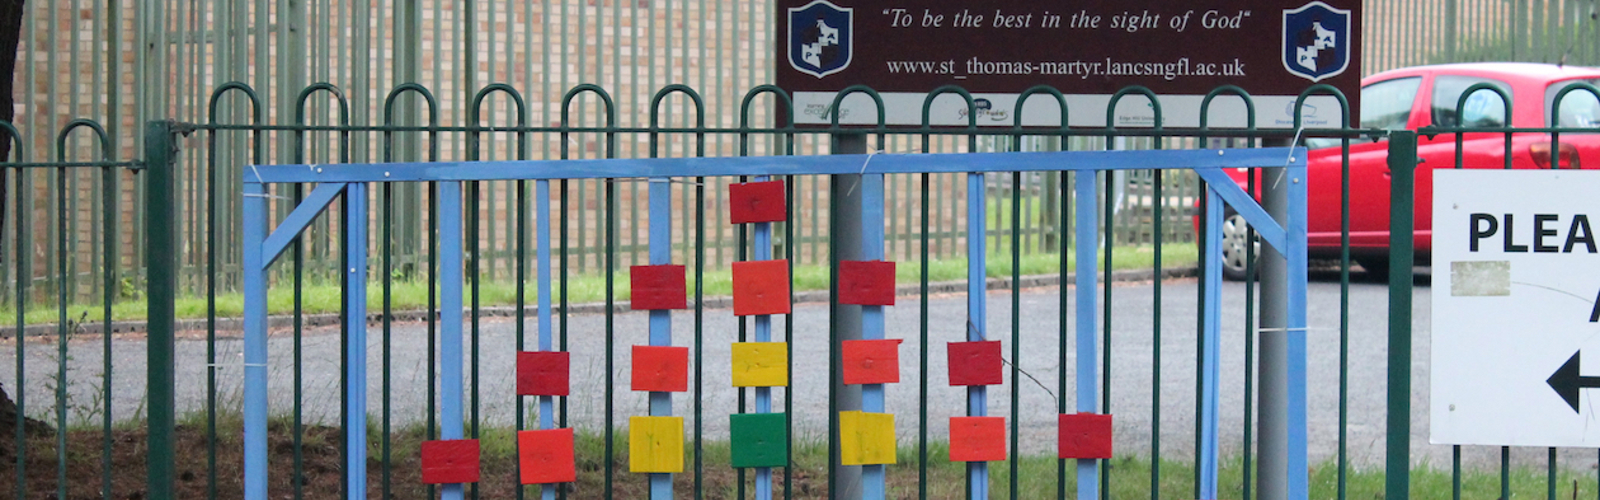 Up Holland, West Lancashire, UK: wooden rainbow blocks on a school gate in support of the NHS